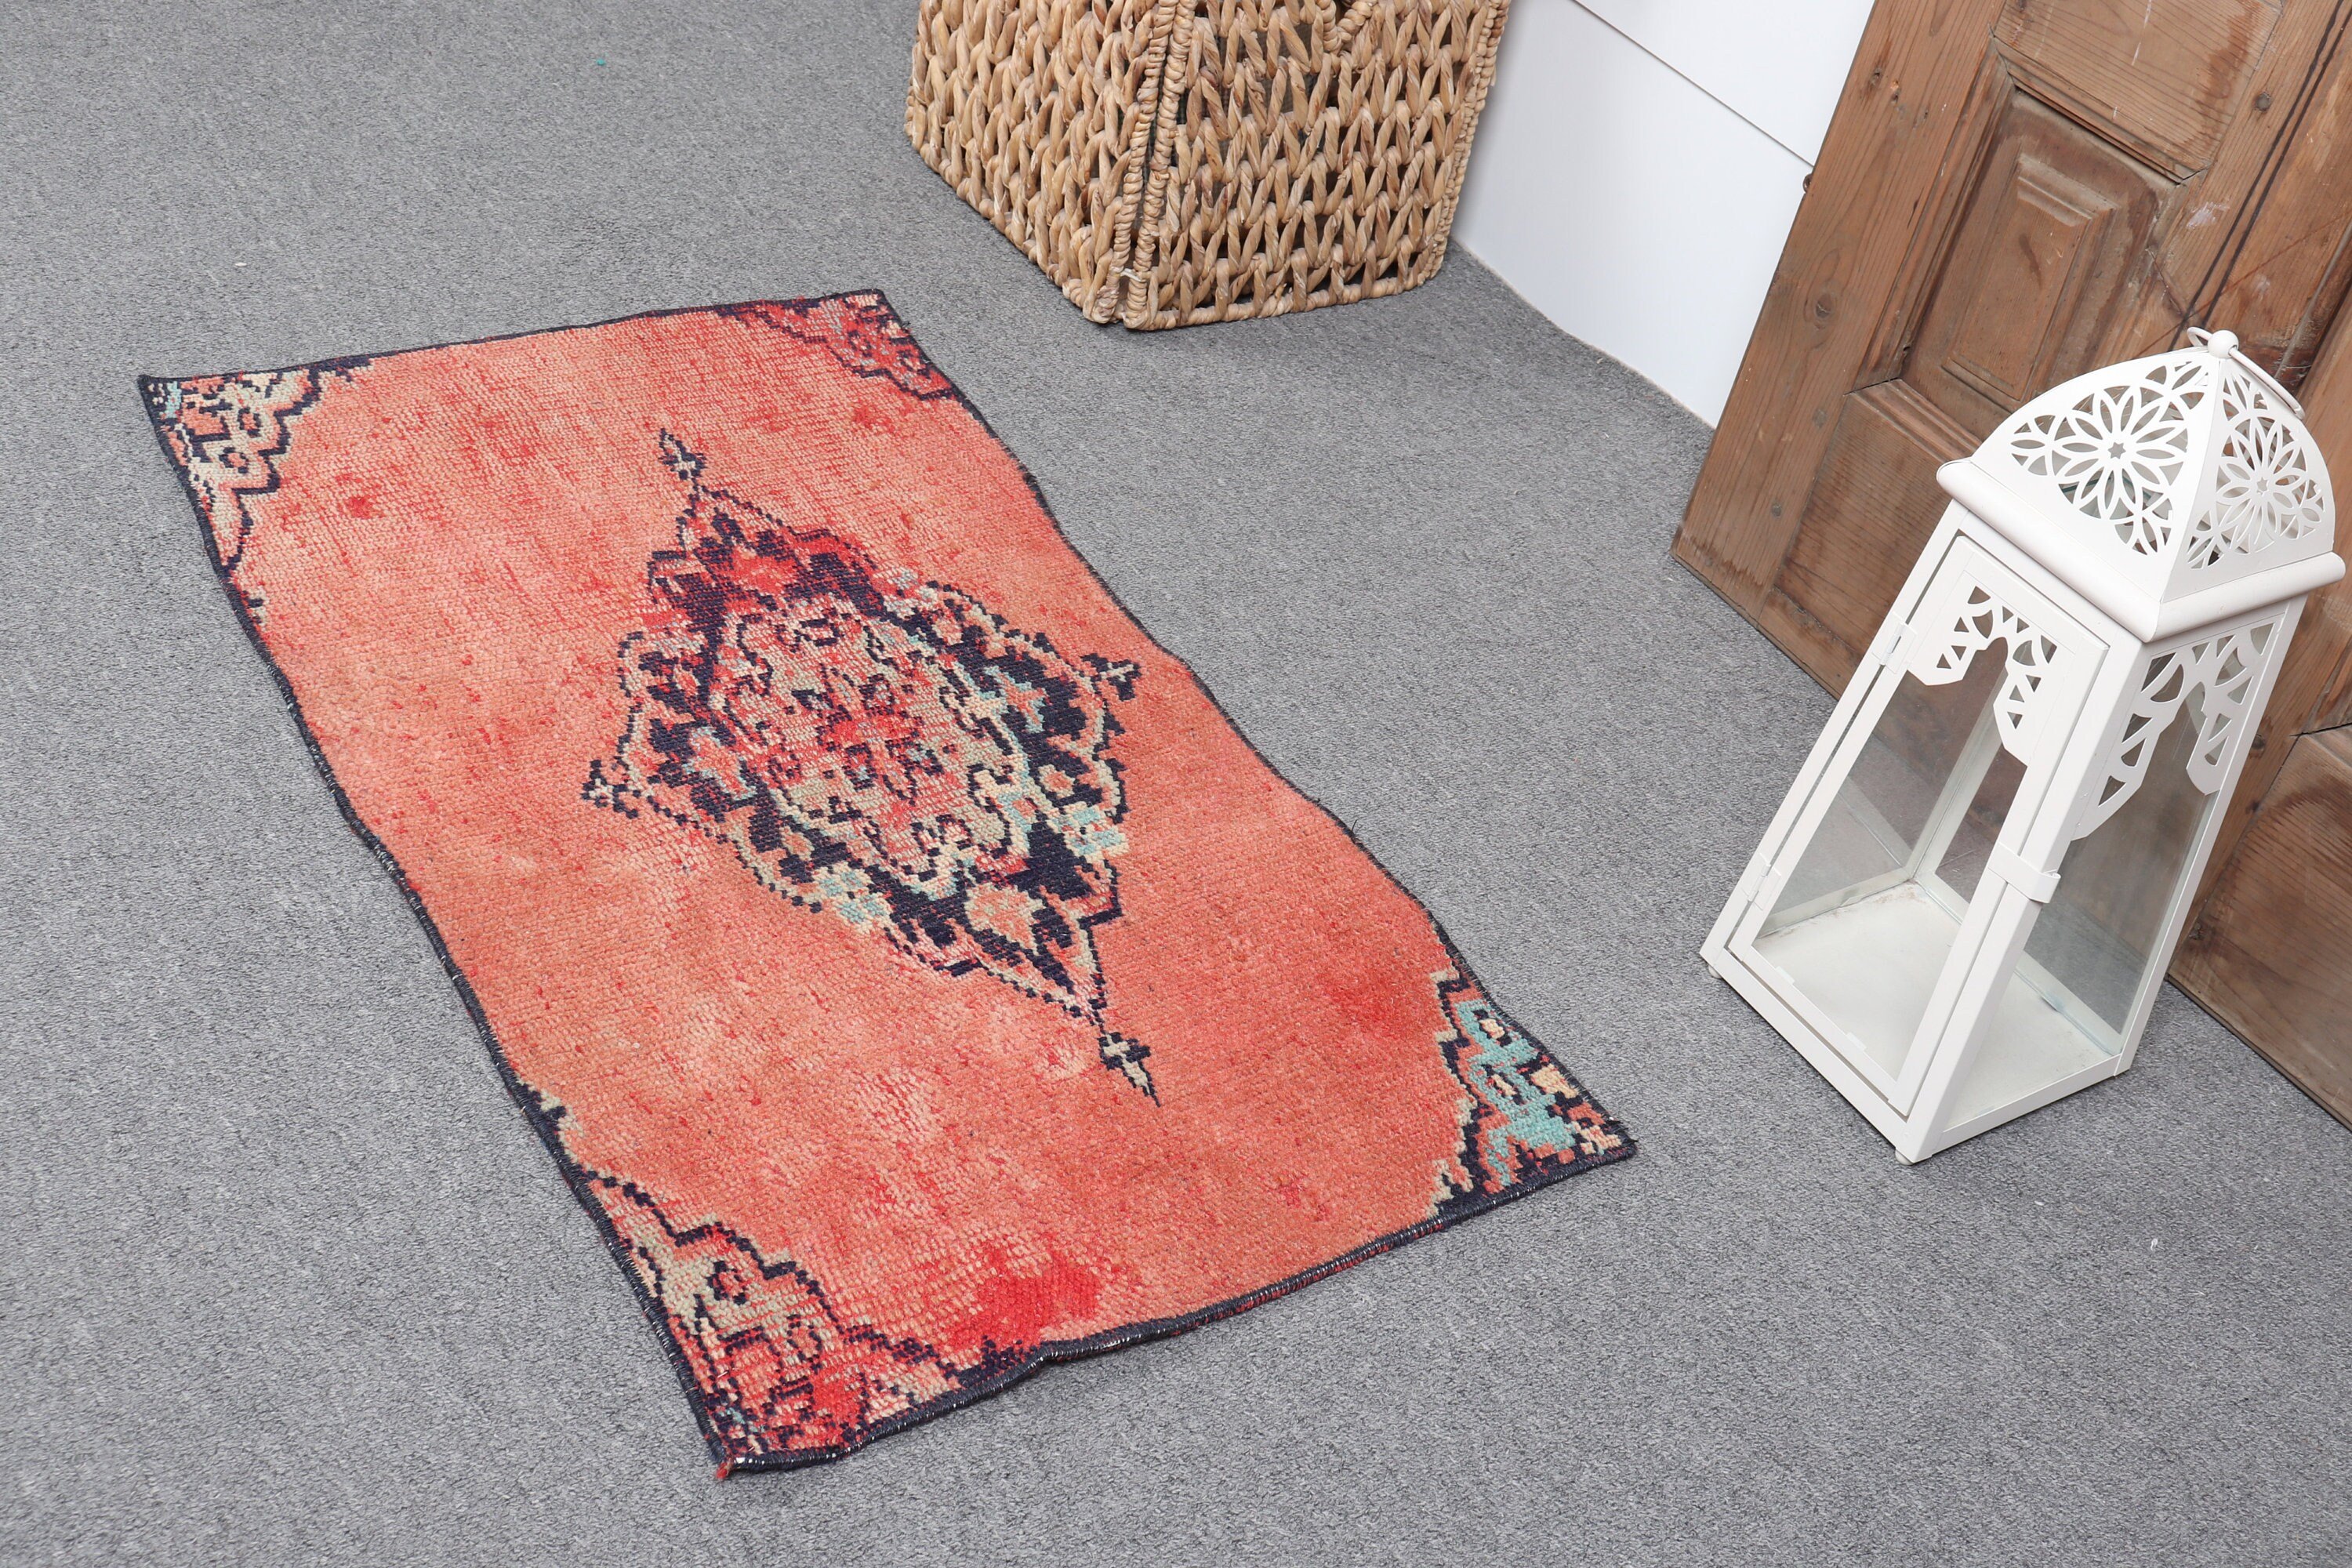 Pale Rugs, Bedroom Rug, 1.6x2.9 ft Small Rugs, Car Mat Rug, Rugs for Car Mat, Turkish Rugs, Red Anatolian Rug, Vintage Rug, Home Decor Rugs